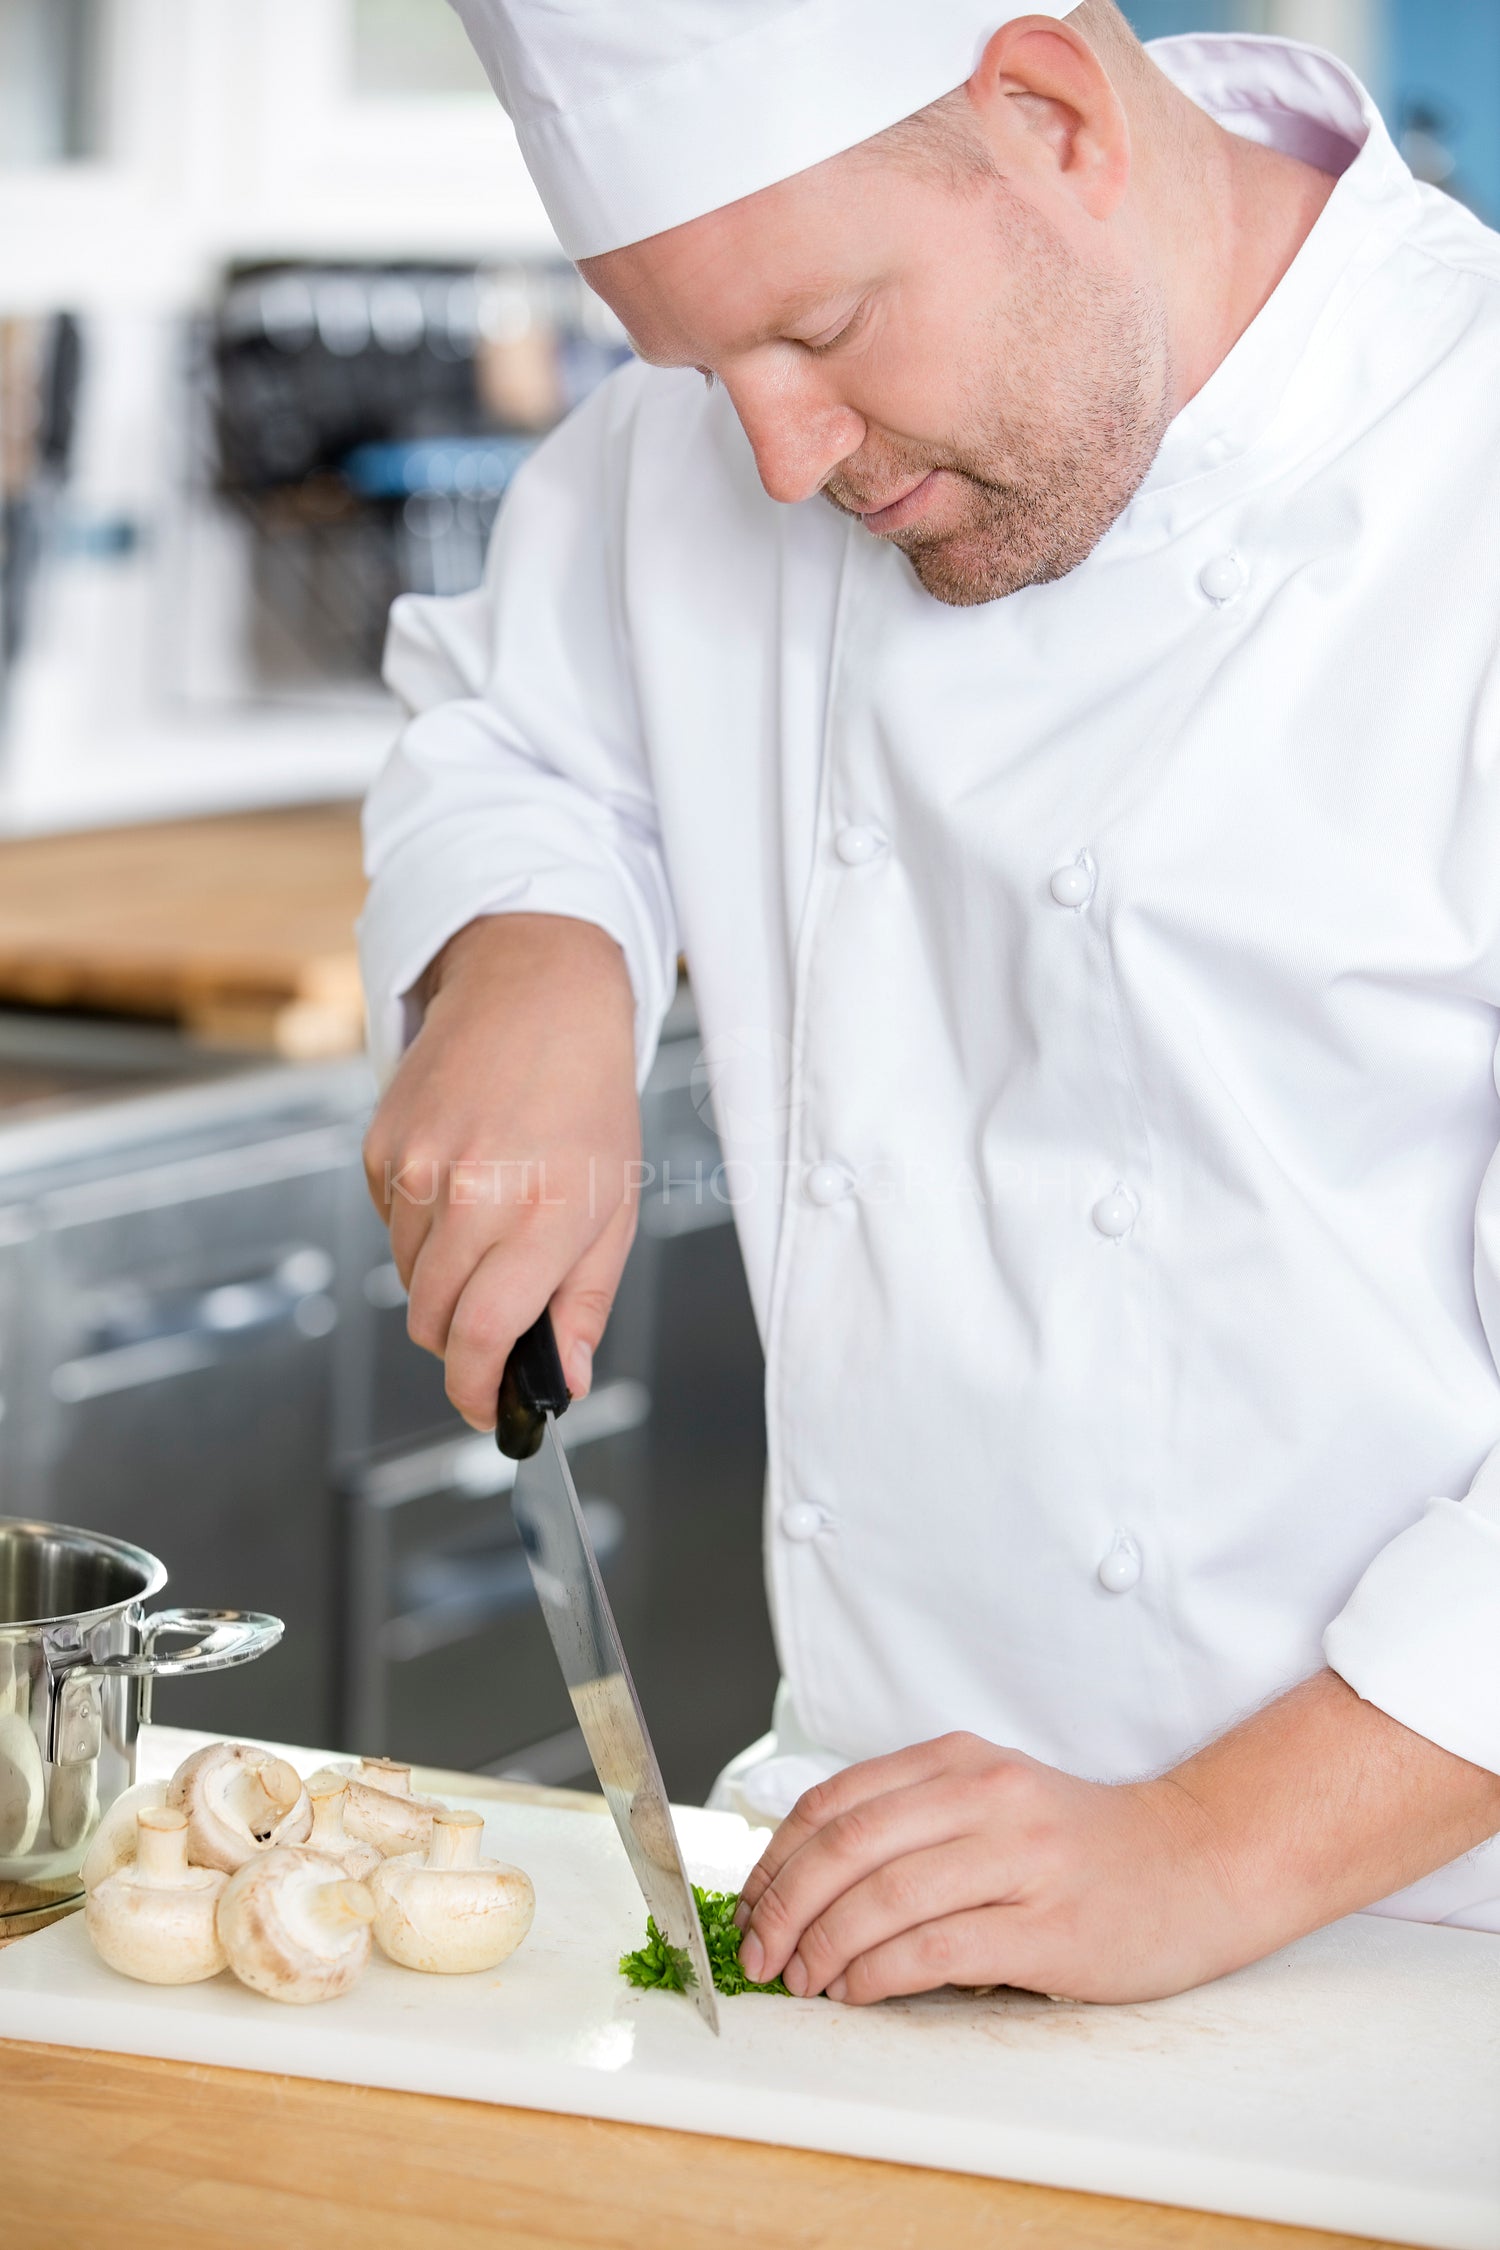 Professional chef preparing vegetables to a healthy dish